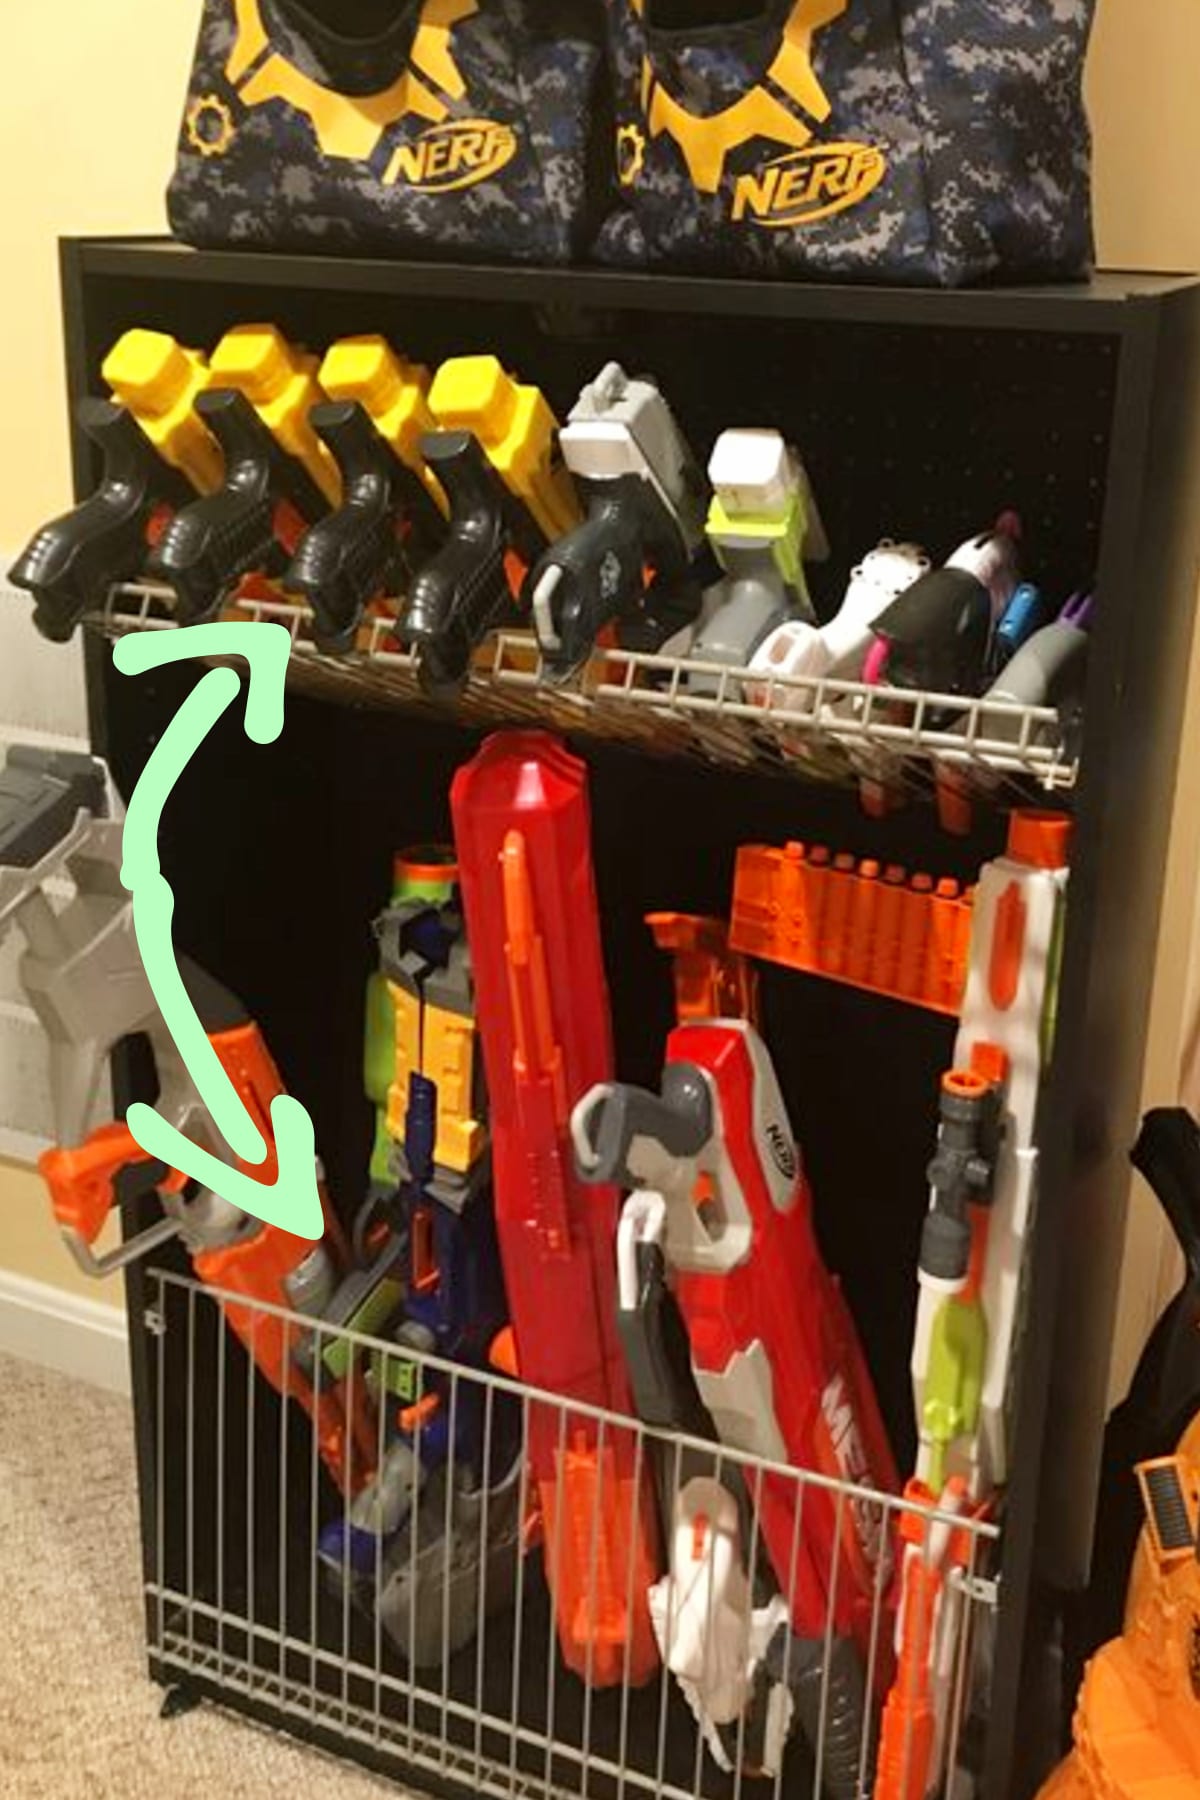 DIY Nerf storage unit made from repurposed old bookshelf and wire shelving